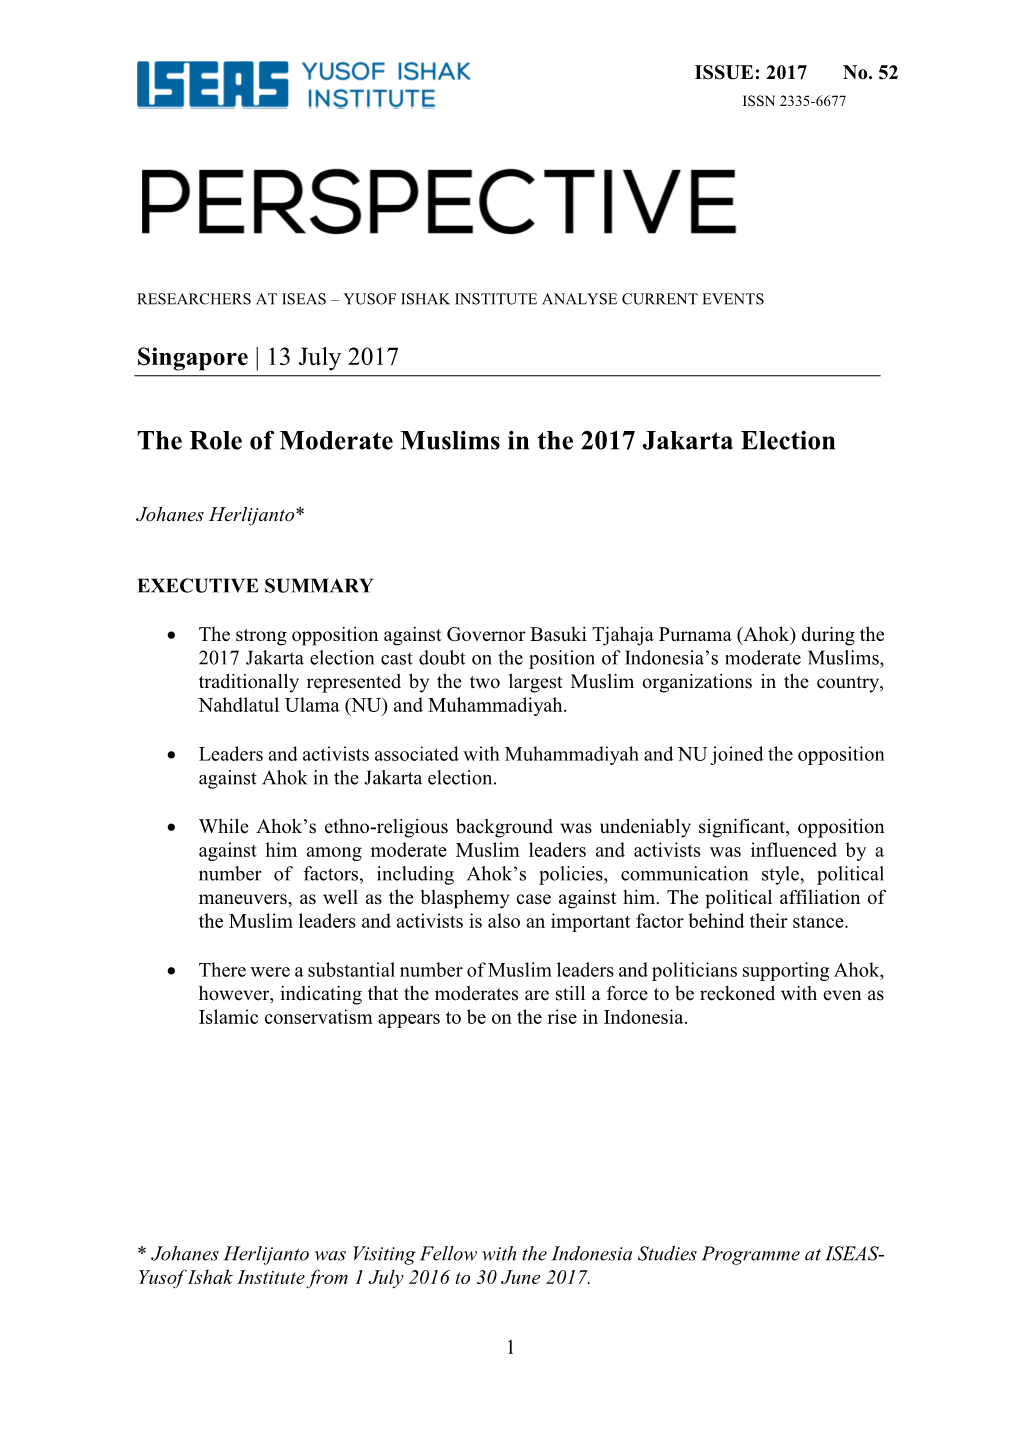 The Role of Moderate Muslims in the 2017 Jakarta Election